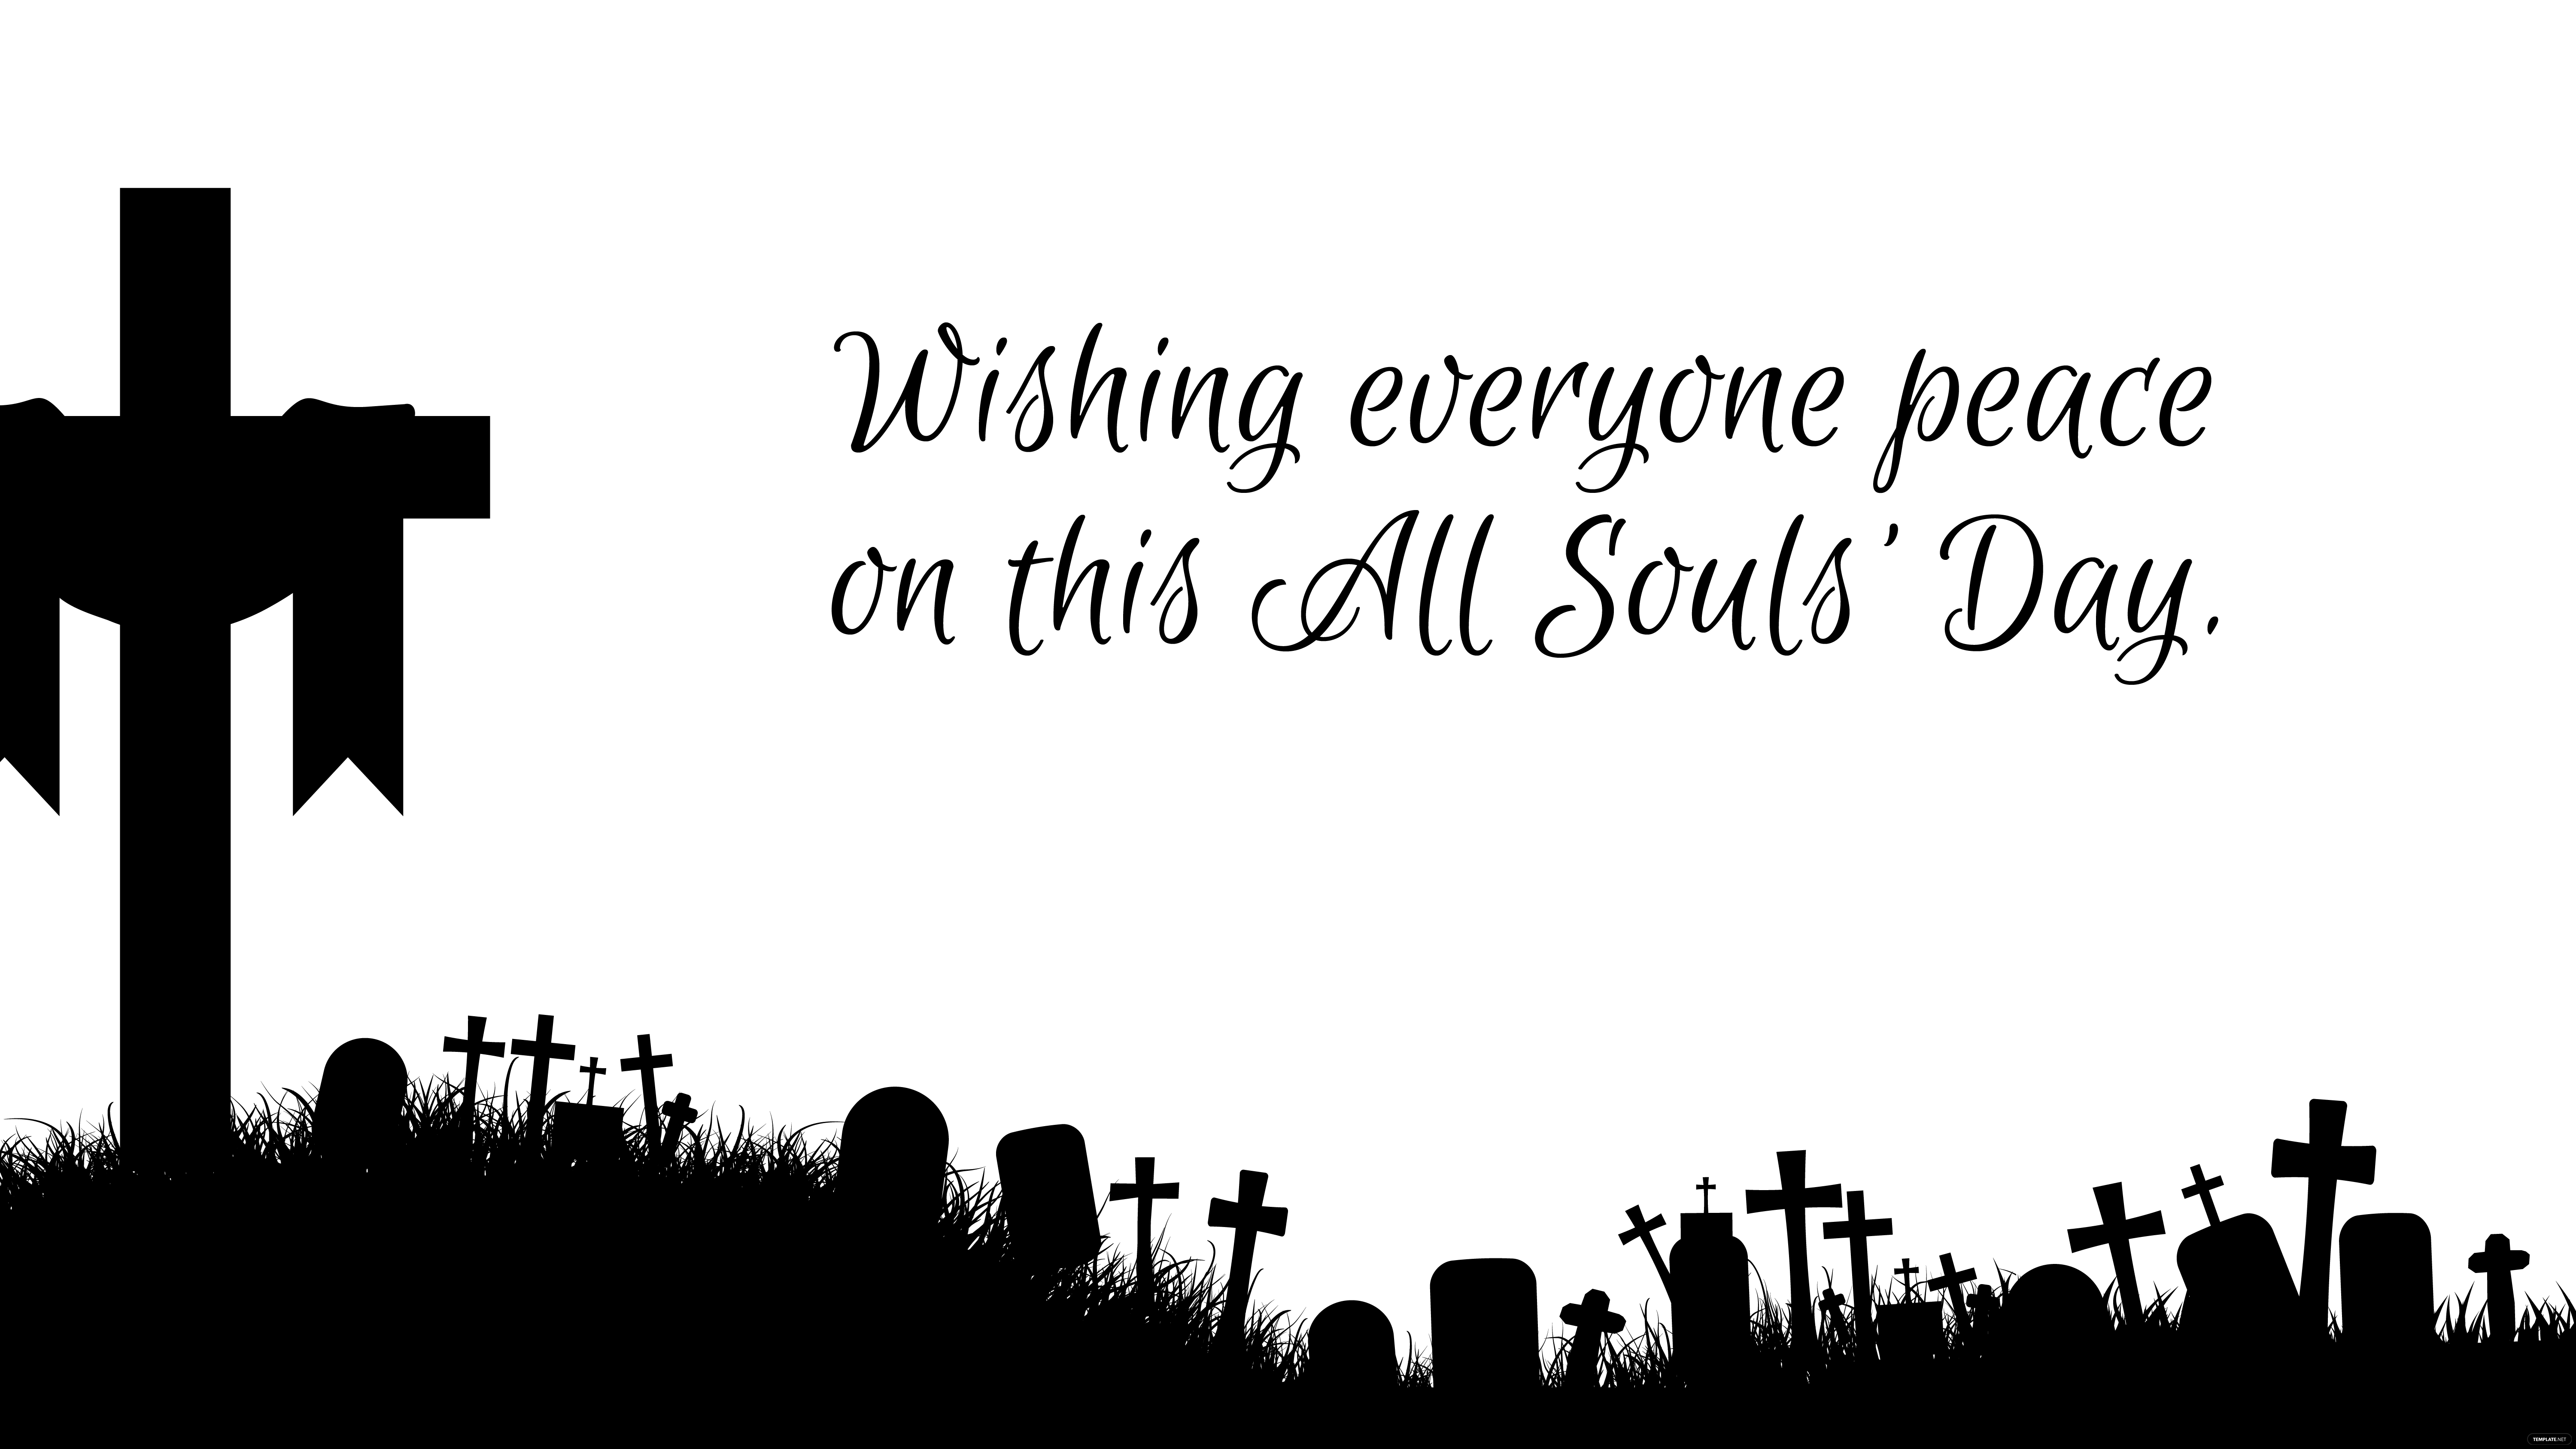 all souls day greeting card background bf3qm